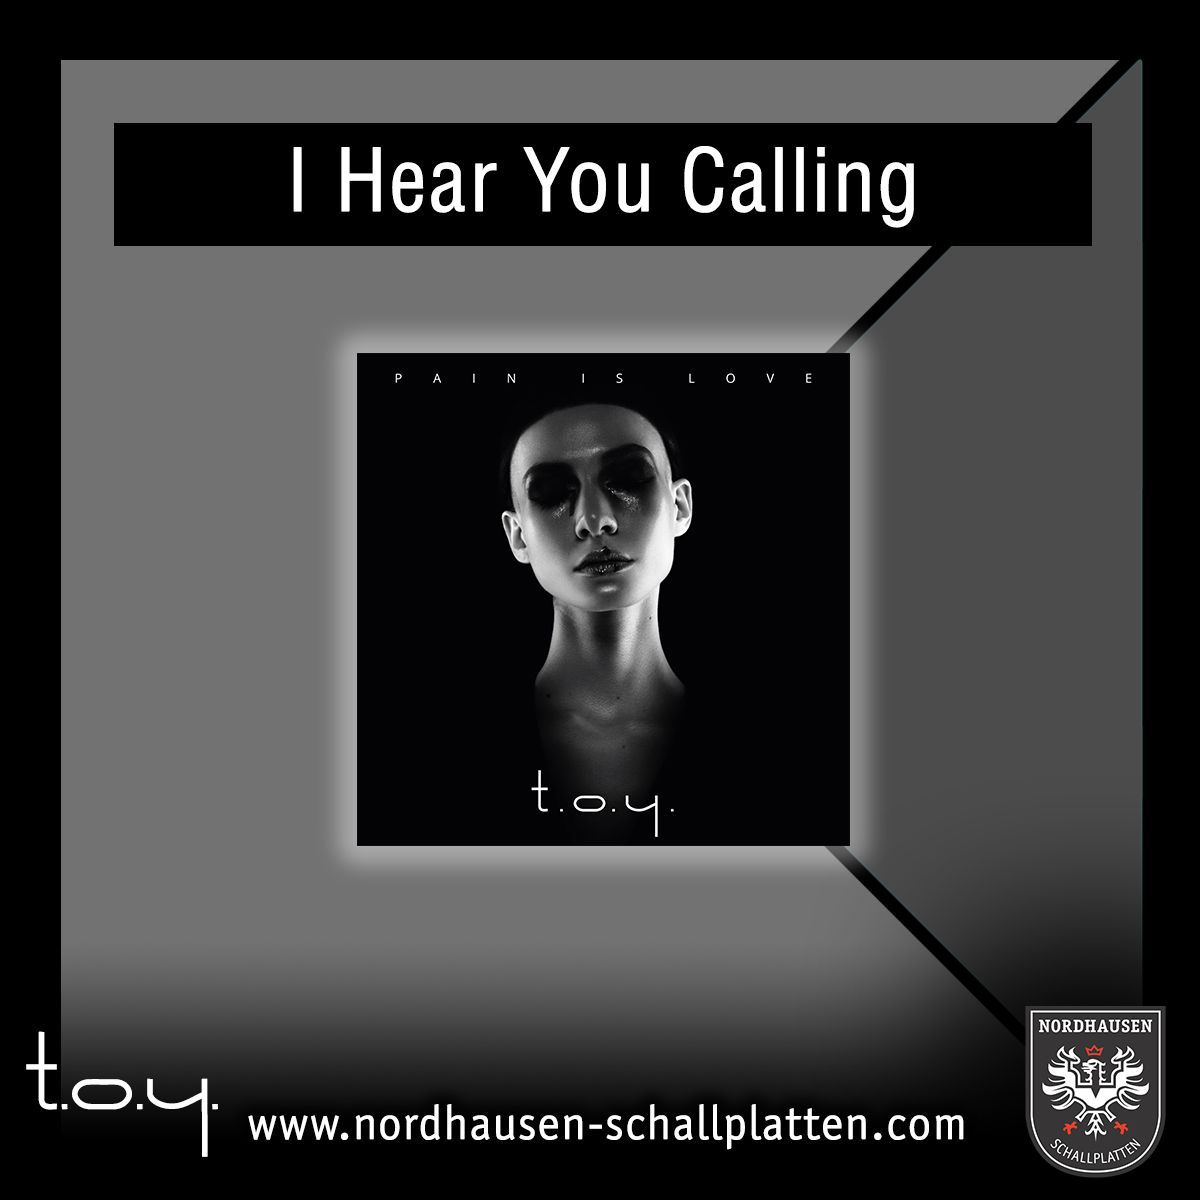 Listen to I Hear You Calling by T.O.Y. on #Youtube and dance like nobody’s watching: buff.ly/2Zm0Kb8 #NordhausenSchallplatten #toy #toymusic #toyofficial #painislove #thedarknessandthelight #spreadthemusic